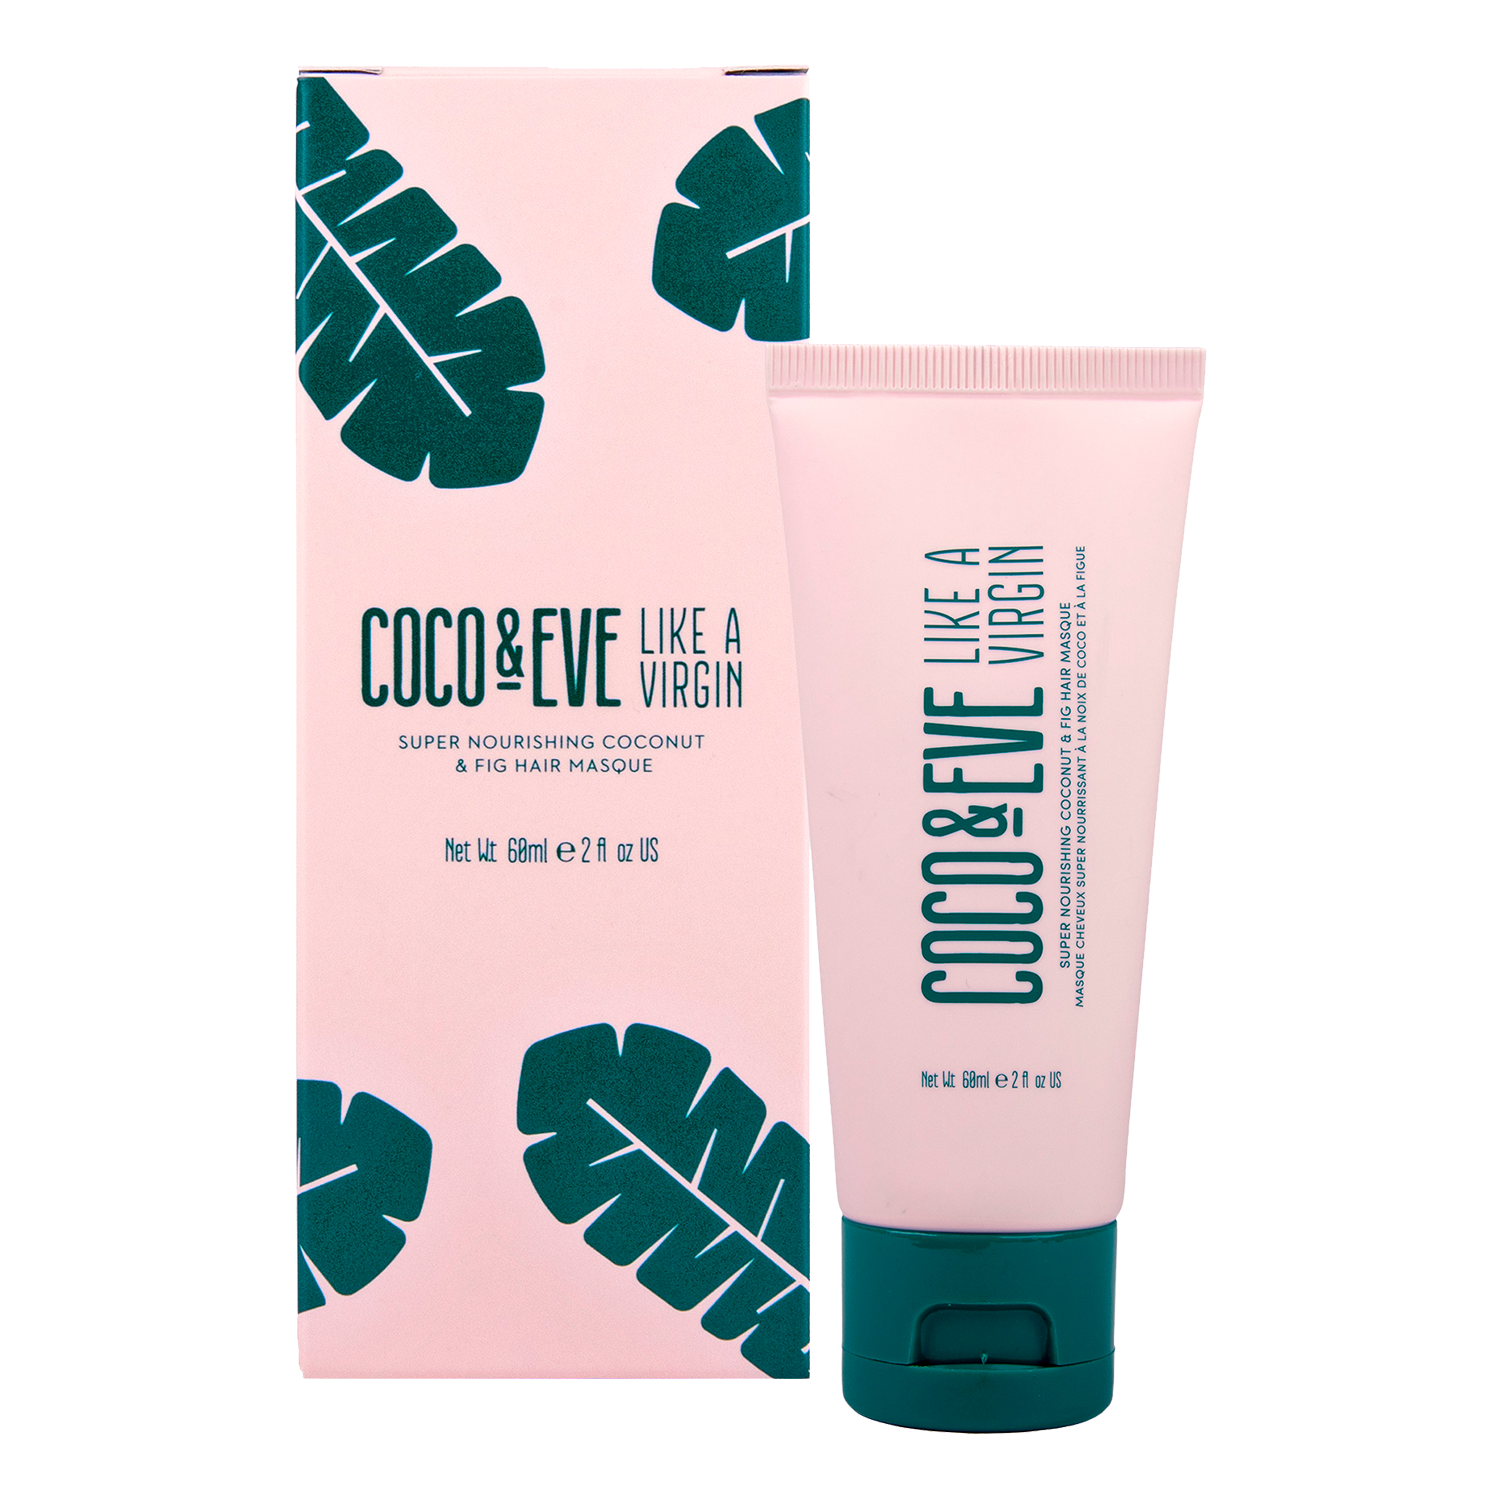 Coco & Eve Travel Size - Like A Virgin Super Nourishing Coconut & Fig Hair Masque Coco & Eve Travel Size - Like A Virgin Super Nourishing Coconut & Fig Hair Masque 1